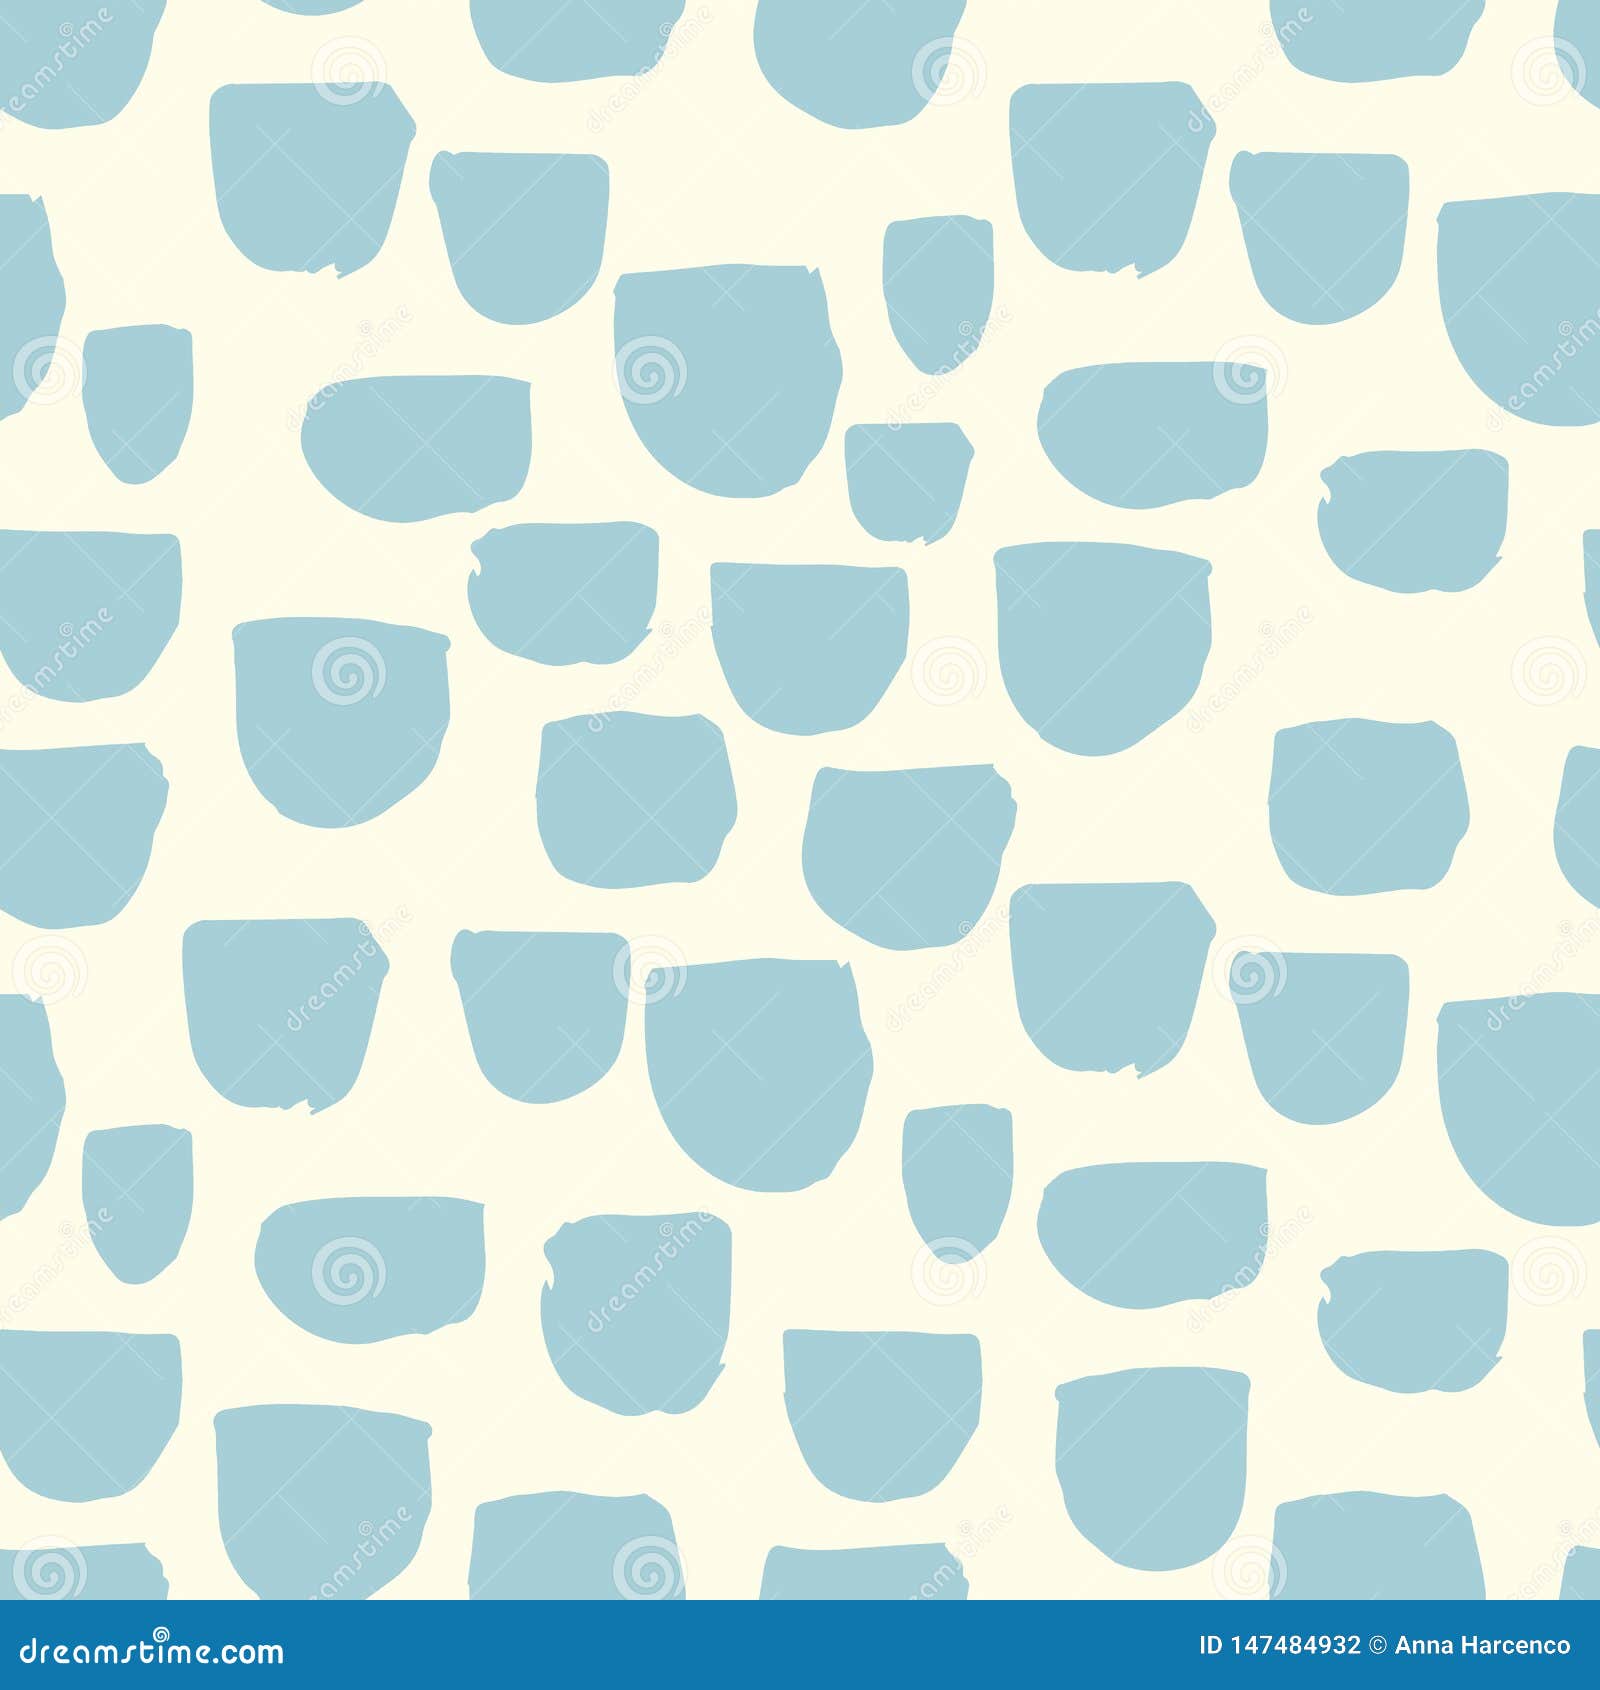 modern  abstract seamless geometric pattern with semicircles in scandinavian style.